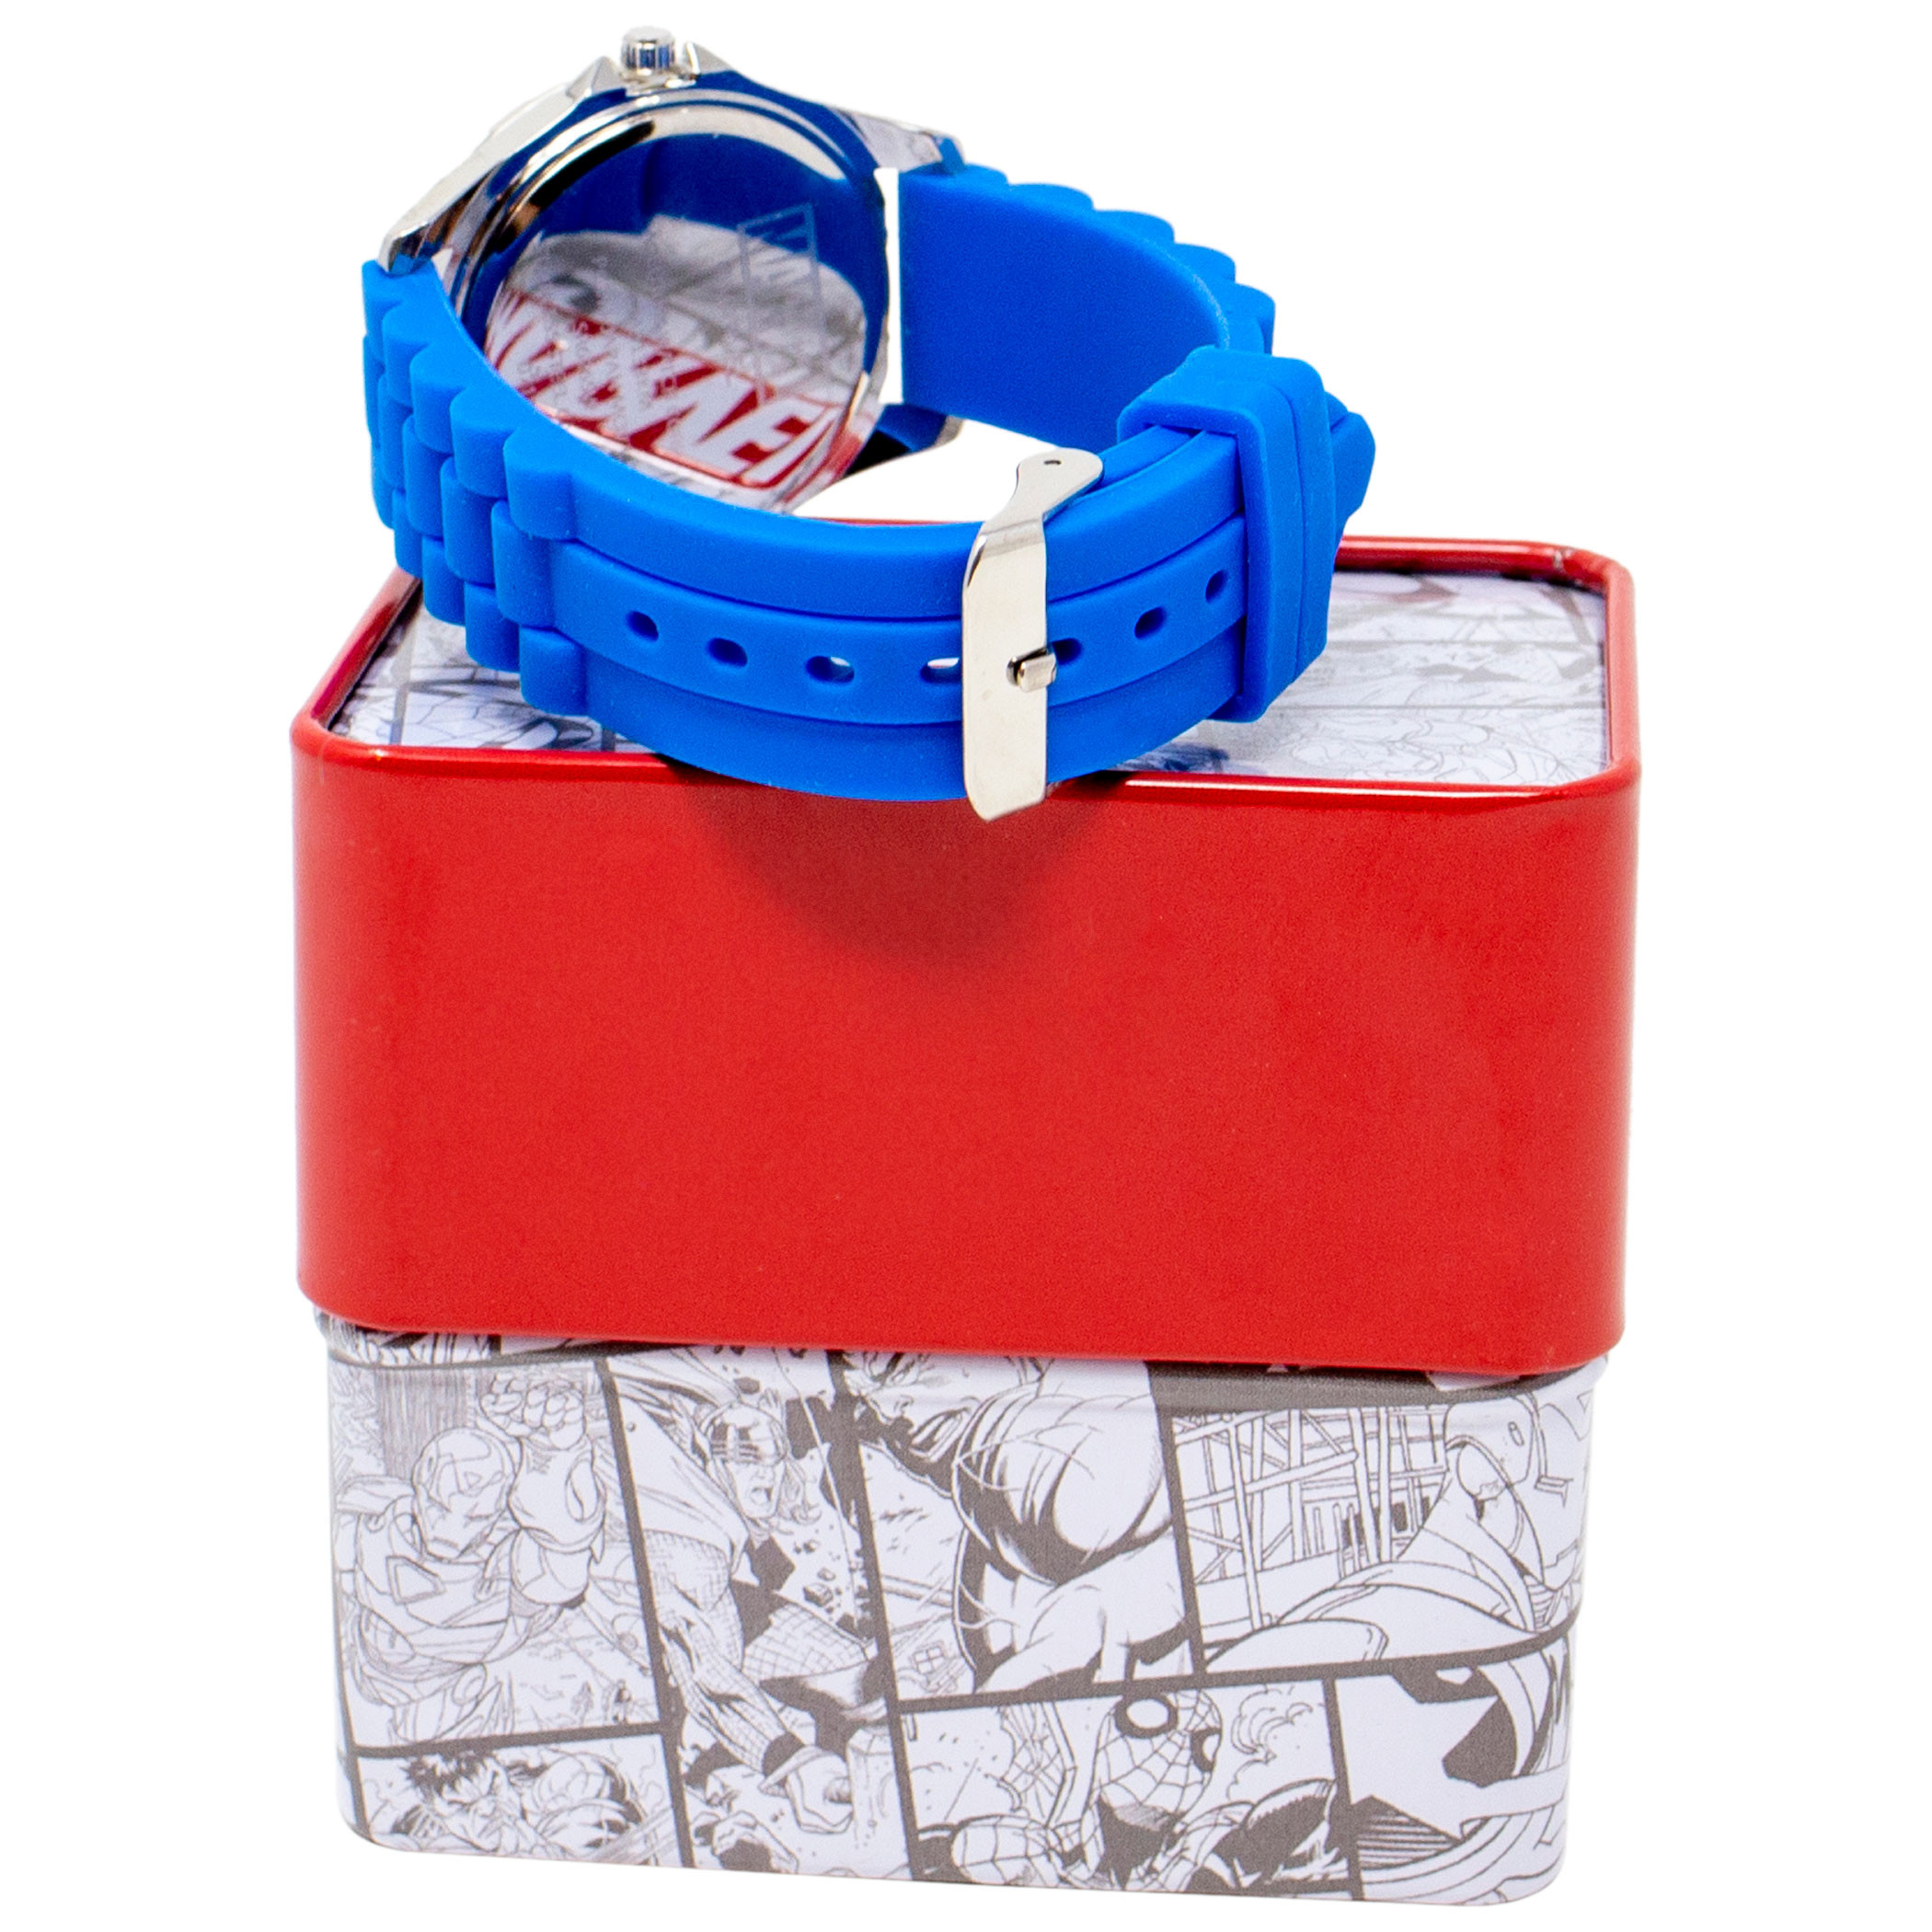 Captain America Shield Watch with Blue Rubber Band